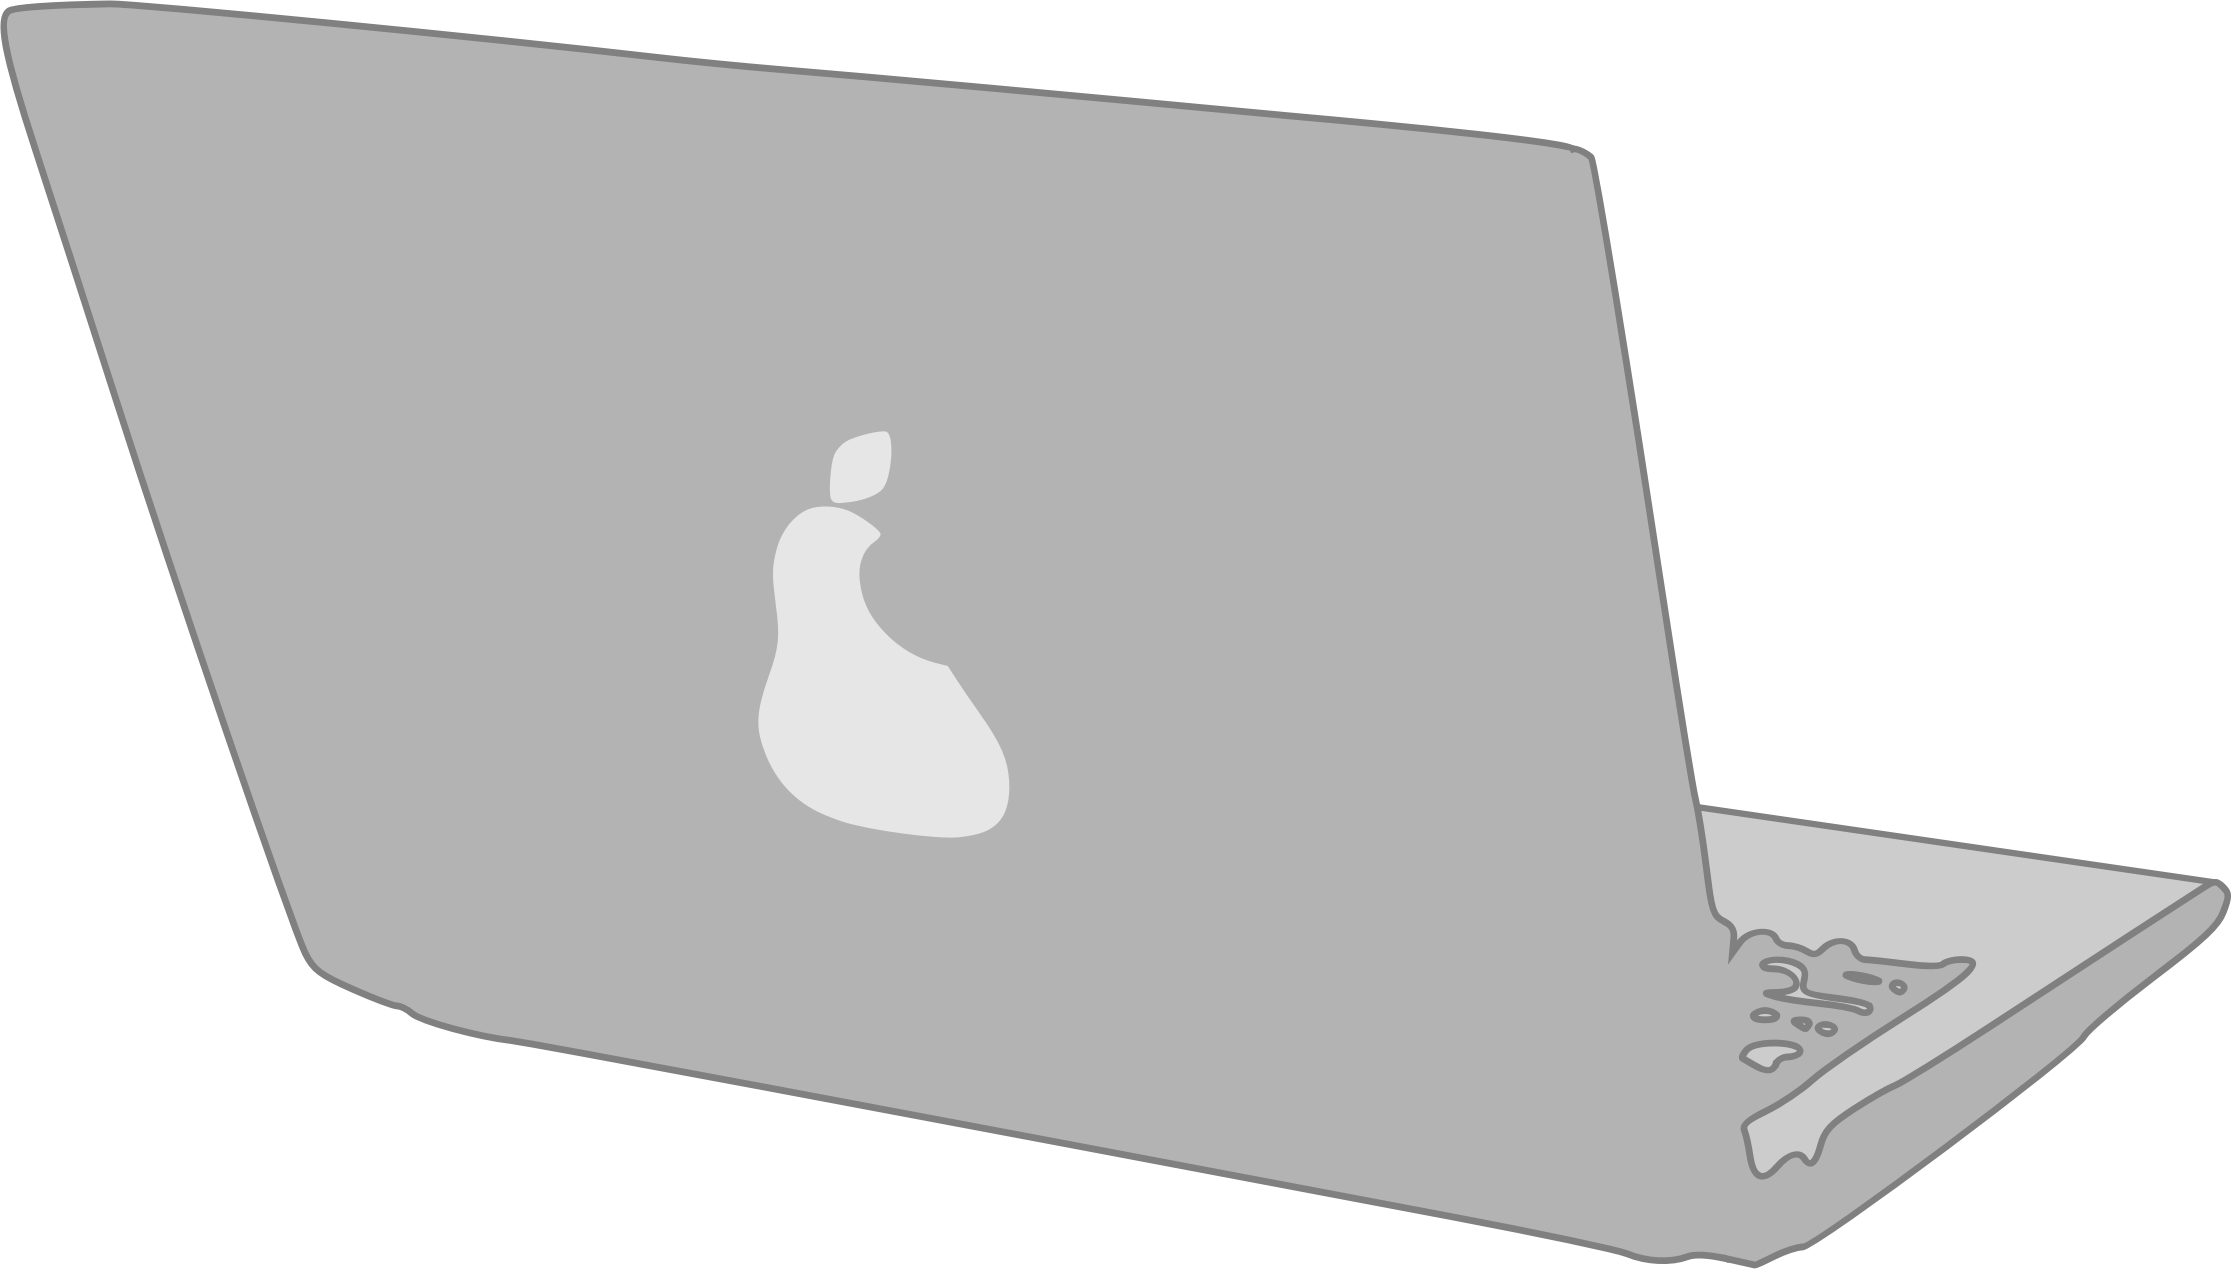 clipart of laptop - photo #44